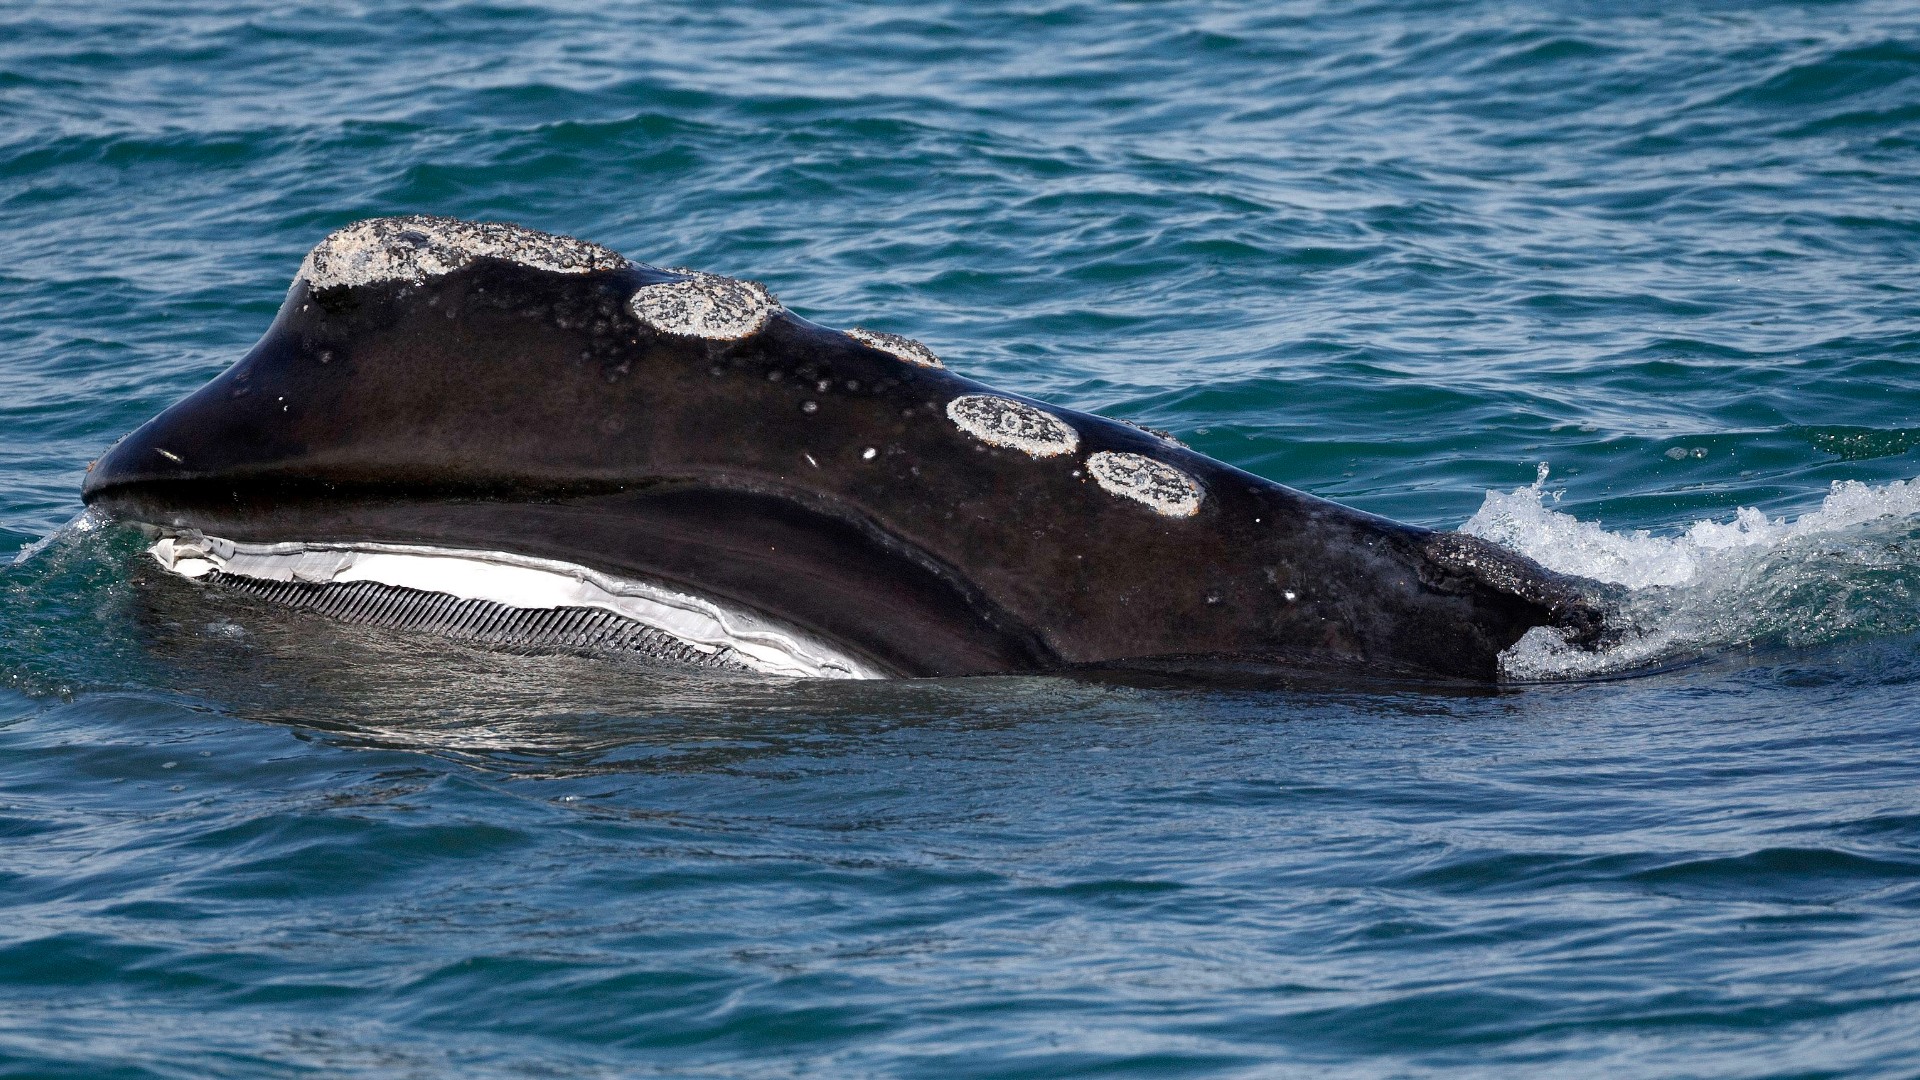 North Atlantic right whales have been listed as endangered under the Endangered Species Act more than 50 years but have been slow to recover.